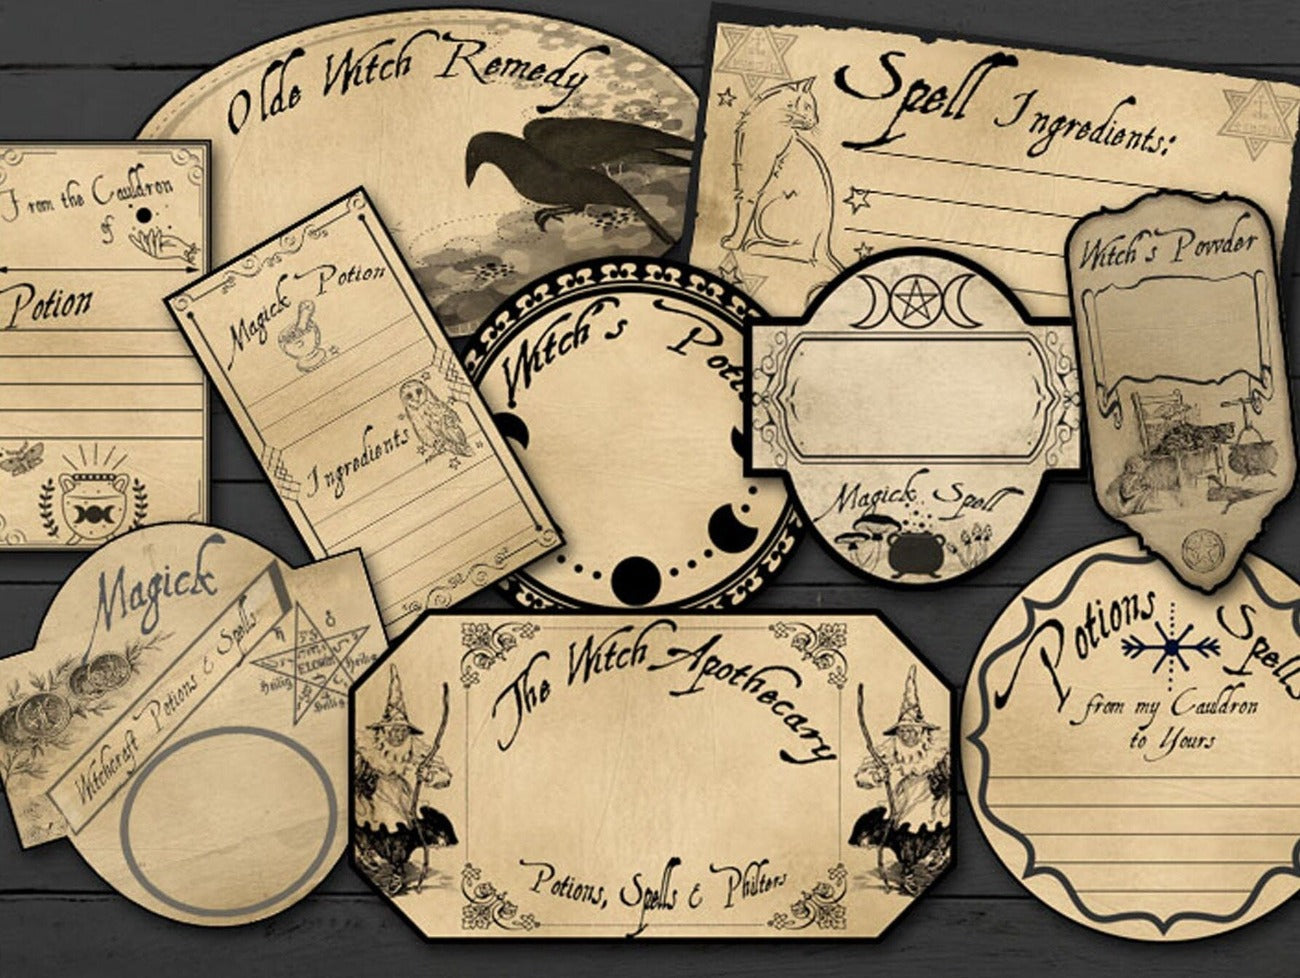 30 Witchy SPELL LABELS, Personalize your Wicca spells and potions, Spell Ingredient Witchcraft Tags, Witch Apothecary Labels, Occult Labels - Morgana Magick Spell